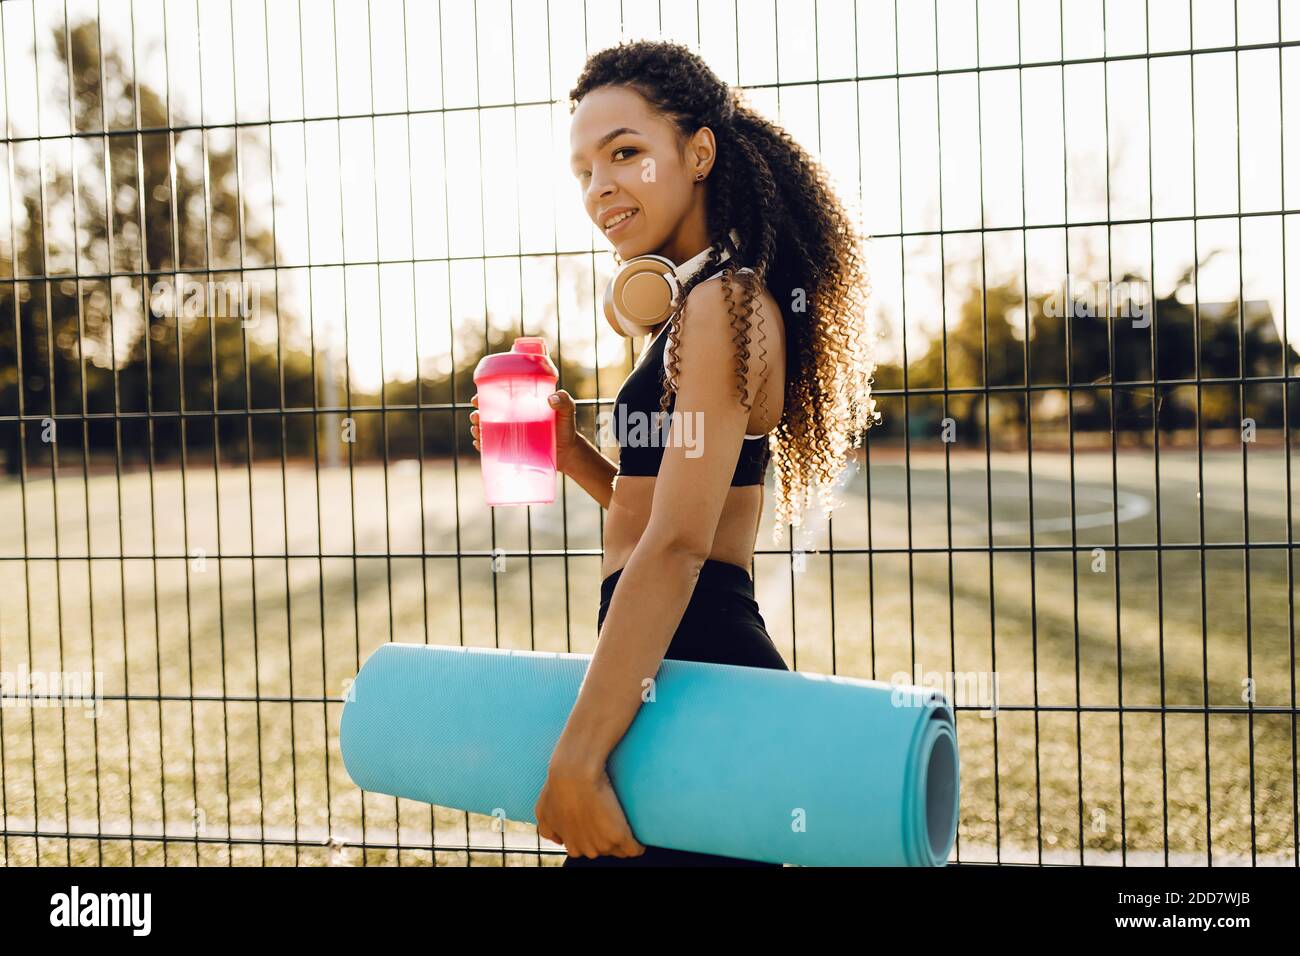 https://c8.alamy.com/comp/2DD7WJB/beautiful-young-athletic-african-american-woman-in-sportswear-holding-a-yoga-mat-and-a-bottle-of-water-outdoors-in-the-park-at-sunrise-2DD7WJB.jpg